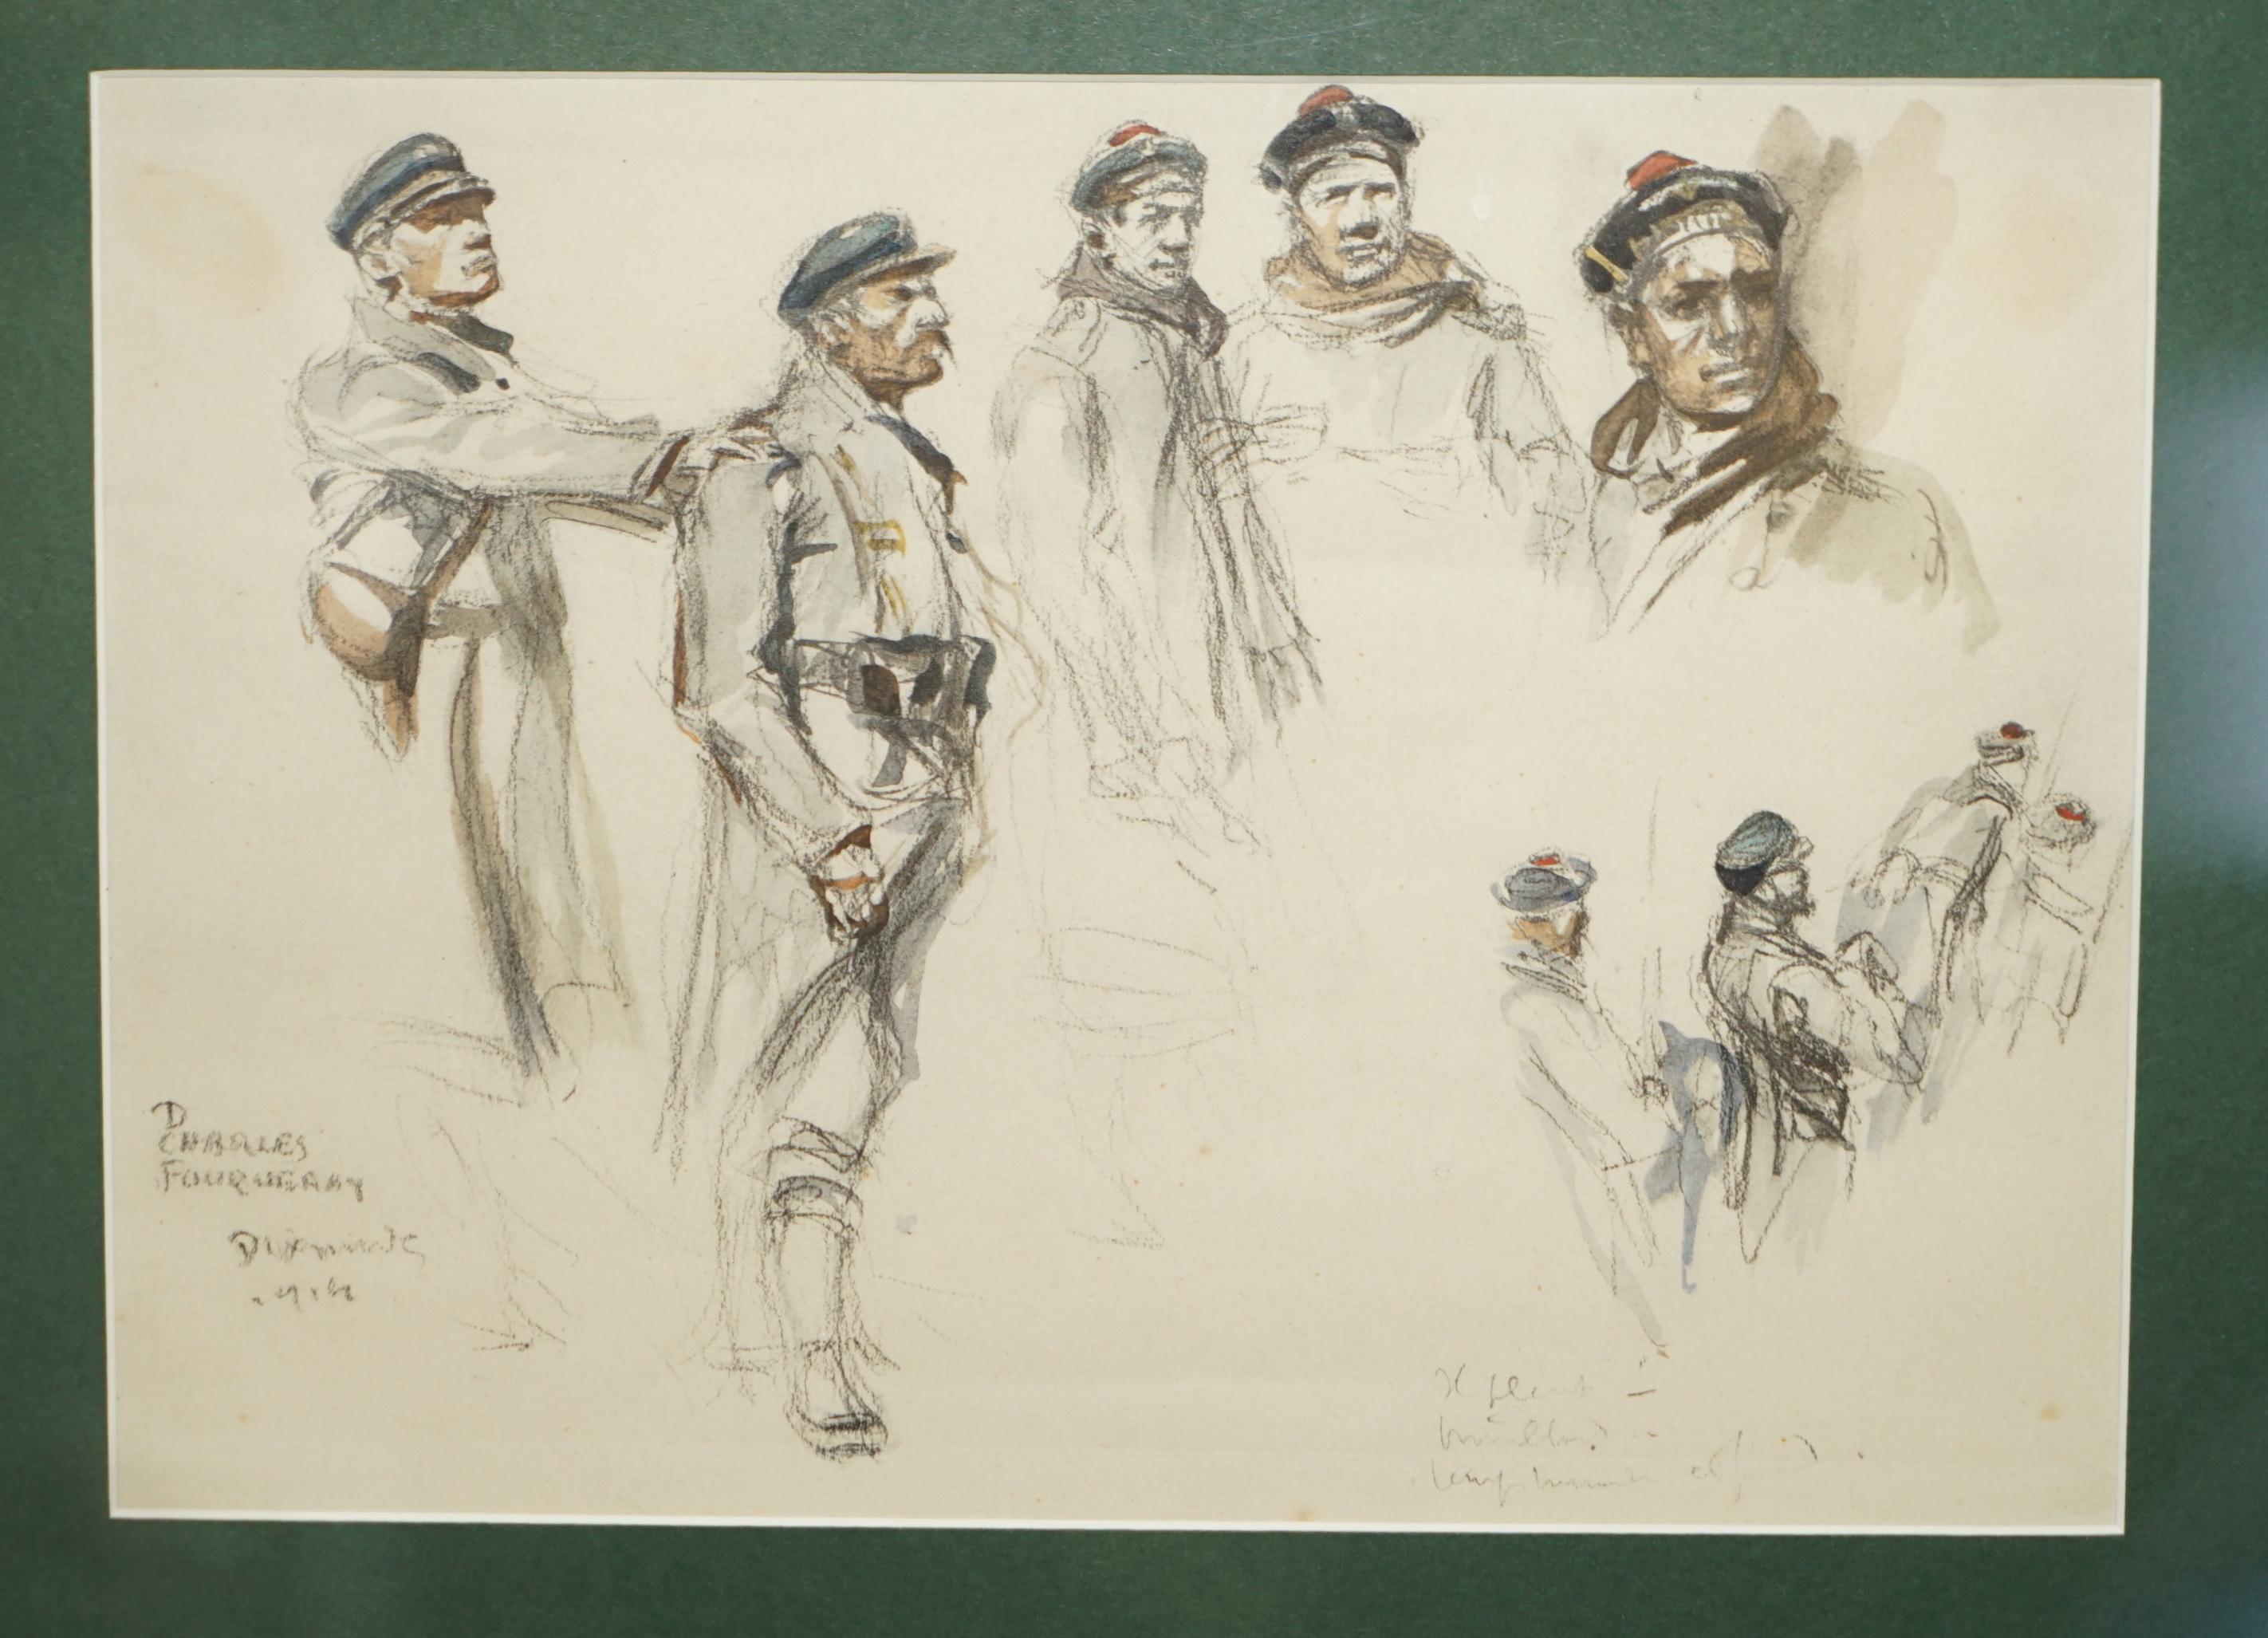 Oak Four World War I Signed Charles Dominique Fouquerary 1914 Water Colour Sketches For Sale